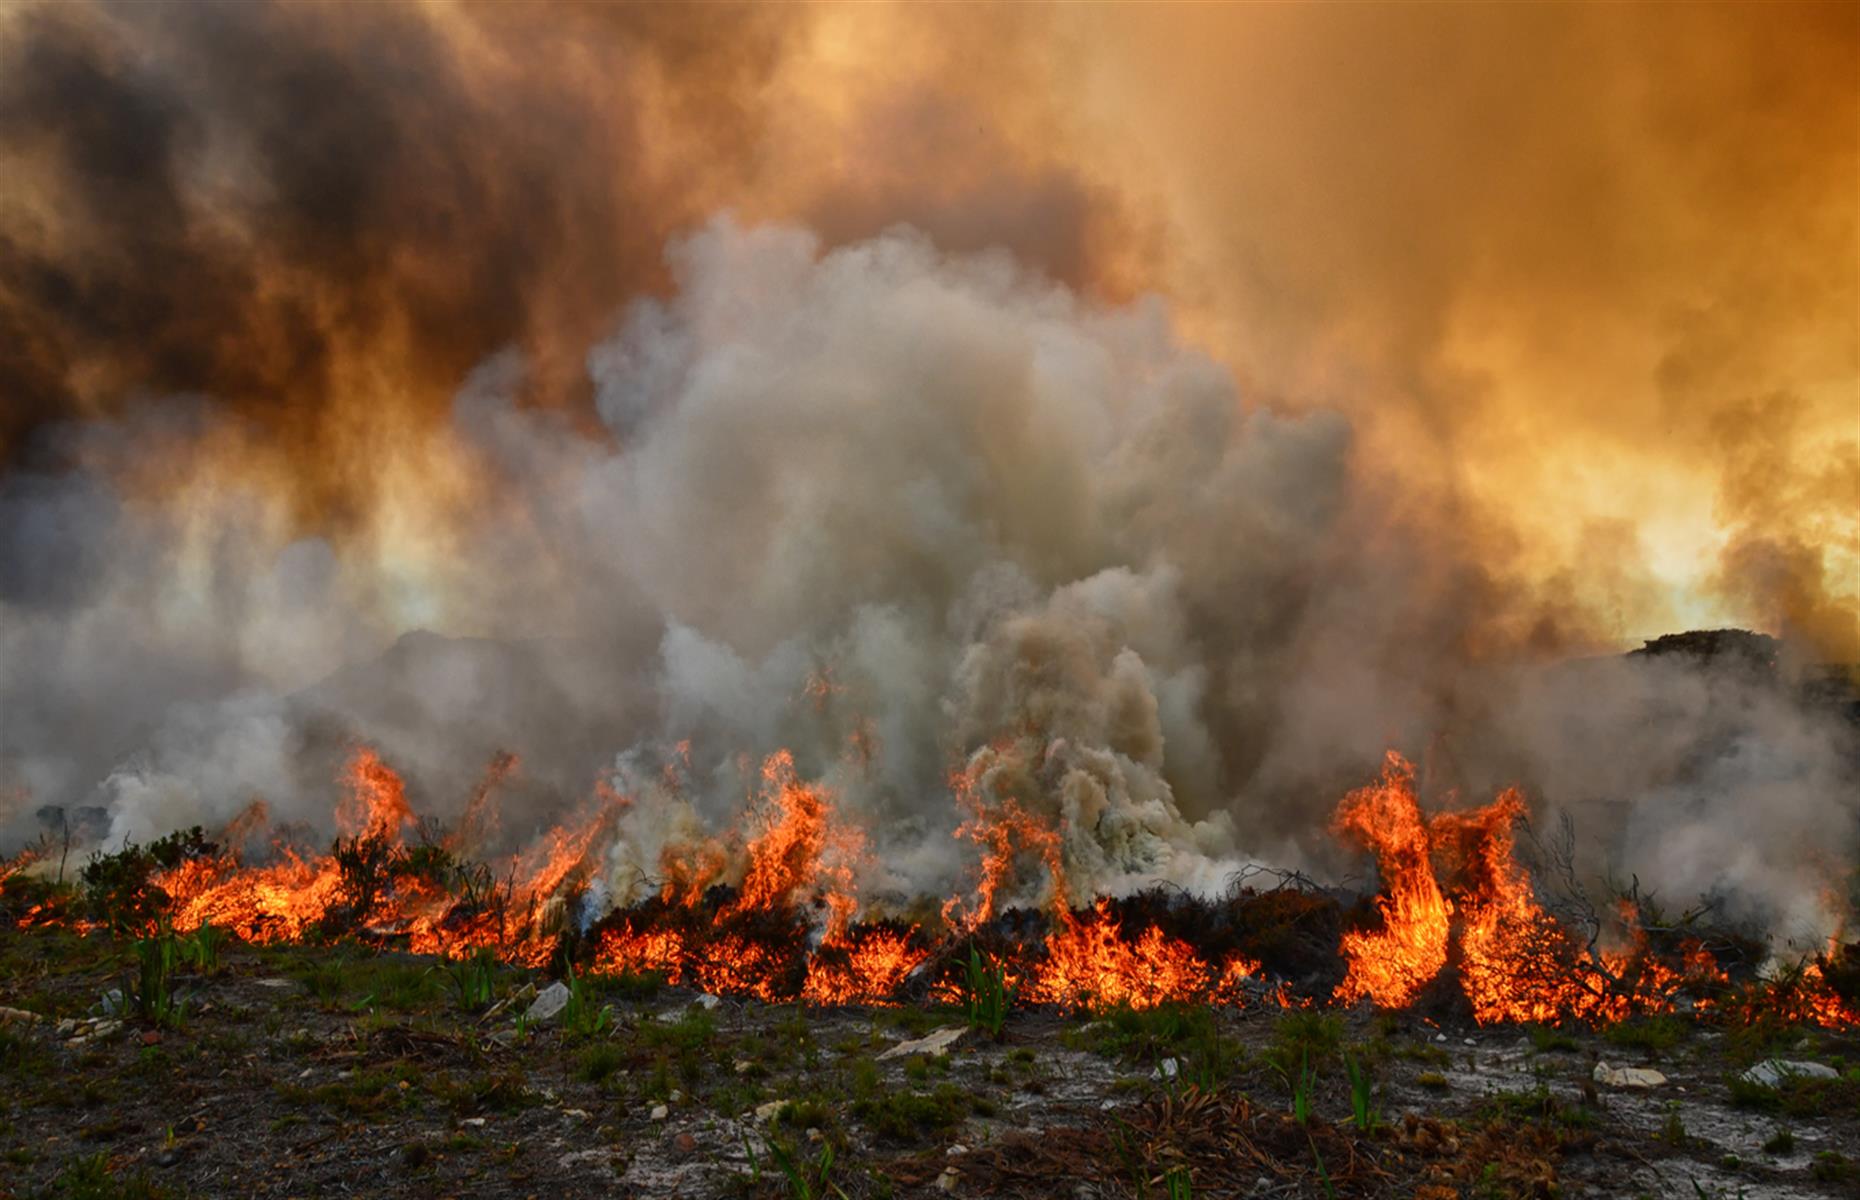 <p>A UNESCO report noted that "climate models suggest that by 2070 the [floral region] will experience average temperatures over 10 months of the year that would have been considered extreme in 1961 to 1990". As well as the flora, the fire-prone ecosystem’s bird population will also be affected by the increasingly extreme climate conditions, many of which pollinate the wildflowers.</p>